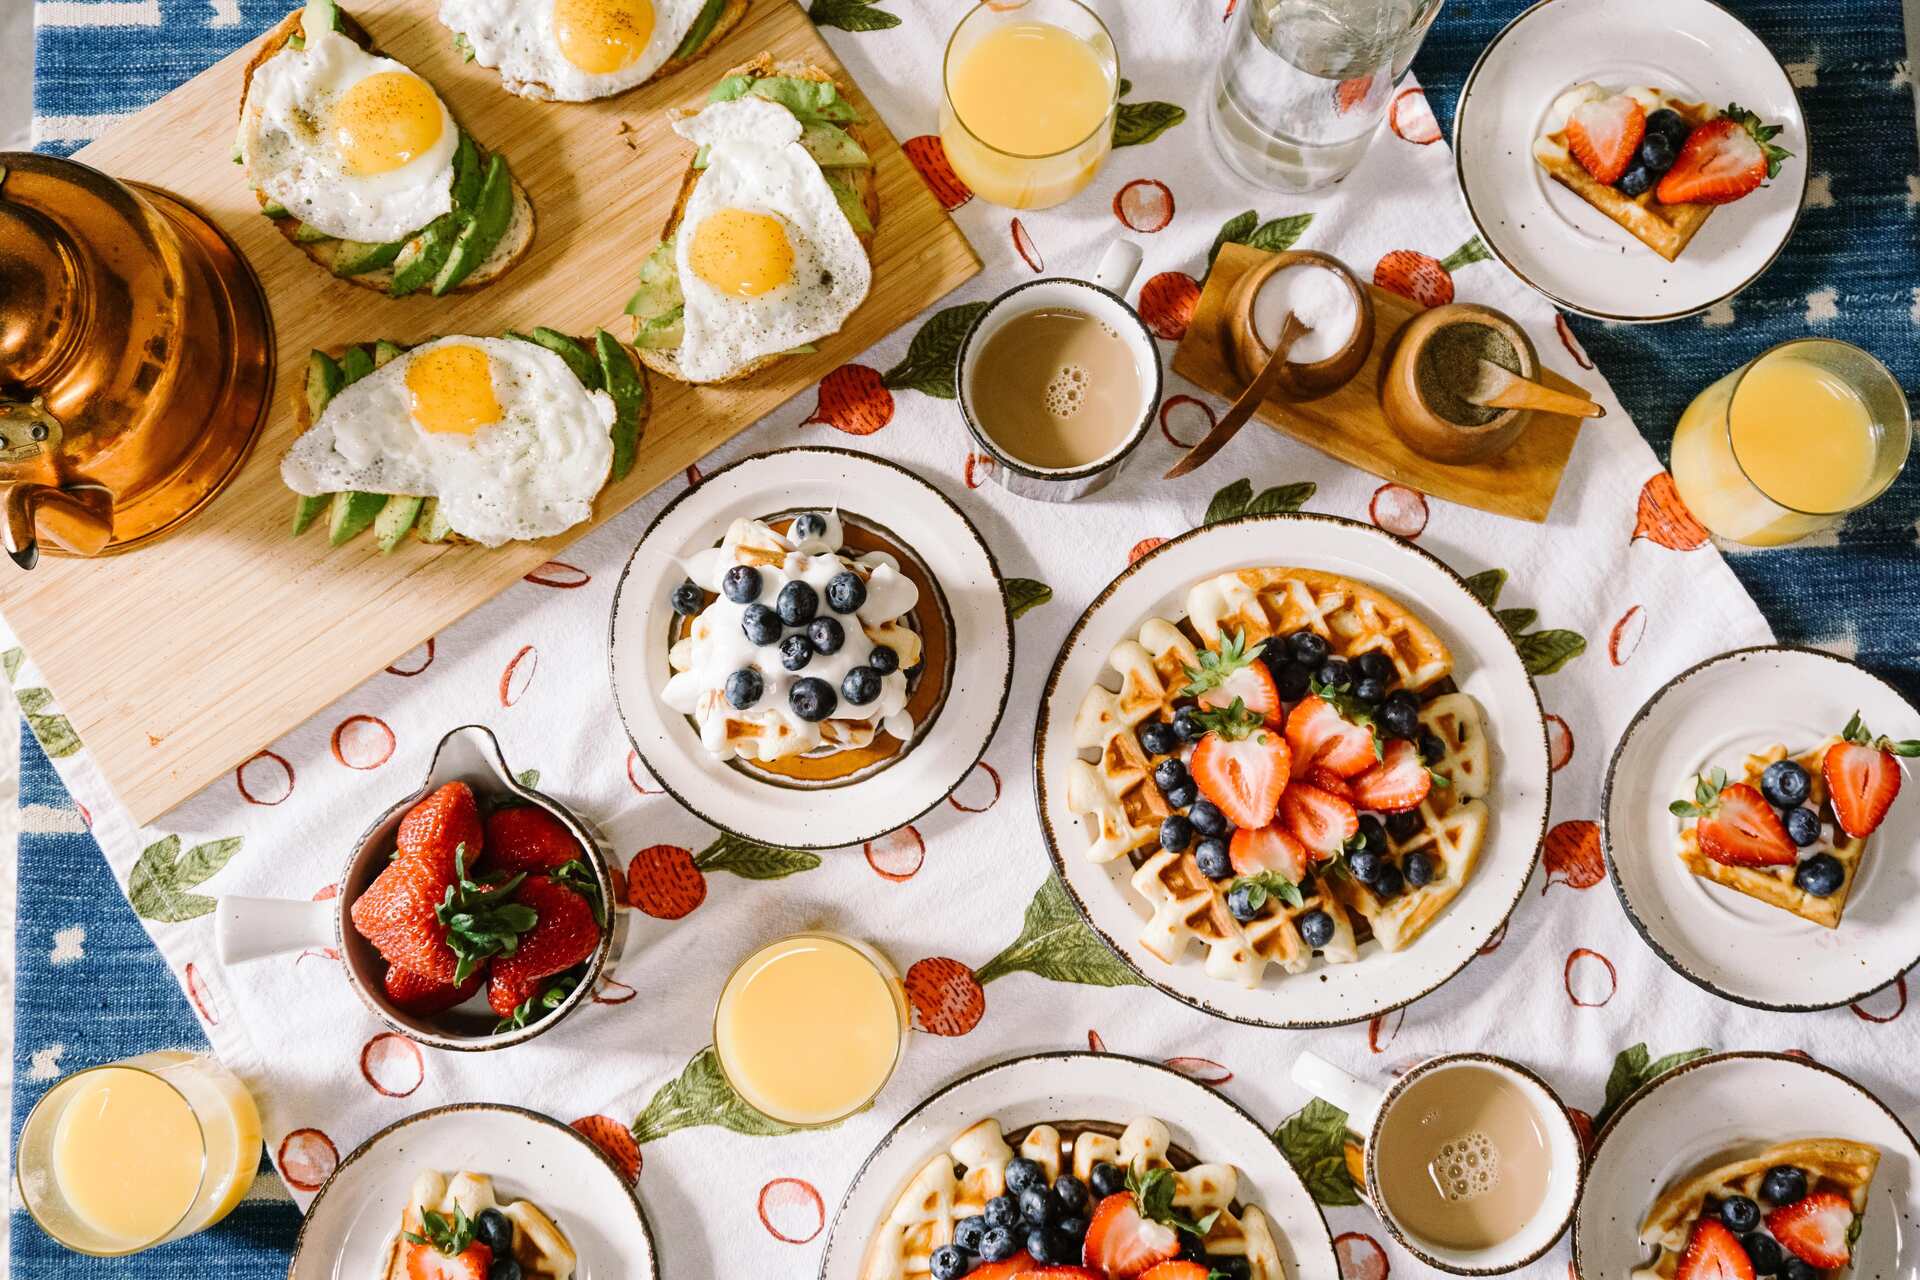 Breakfast foods on a table